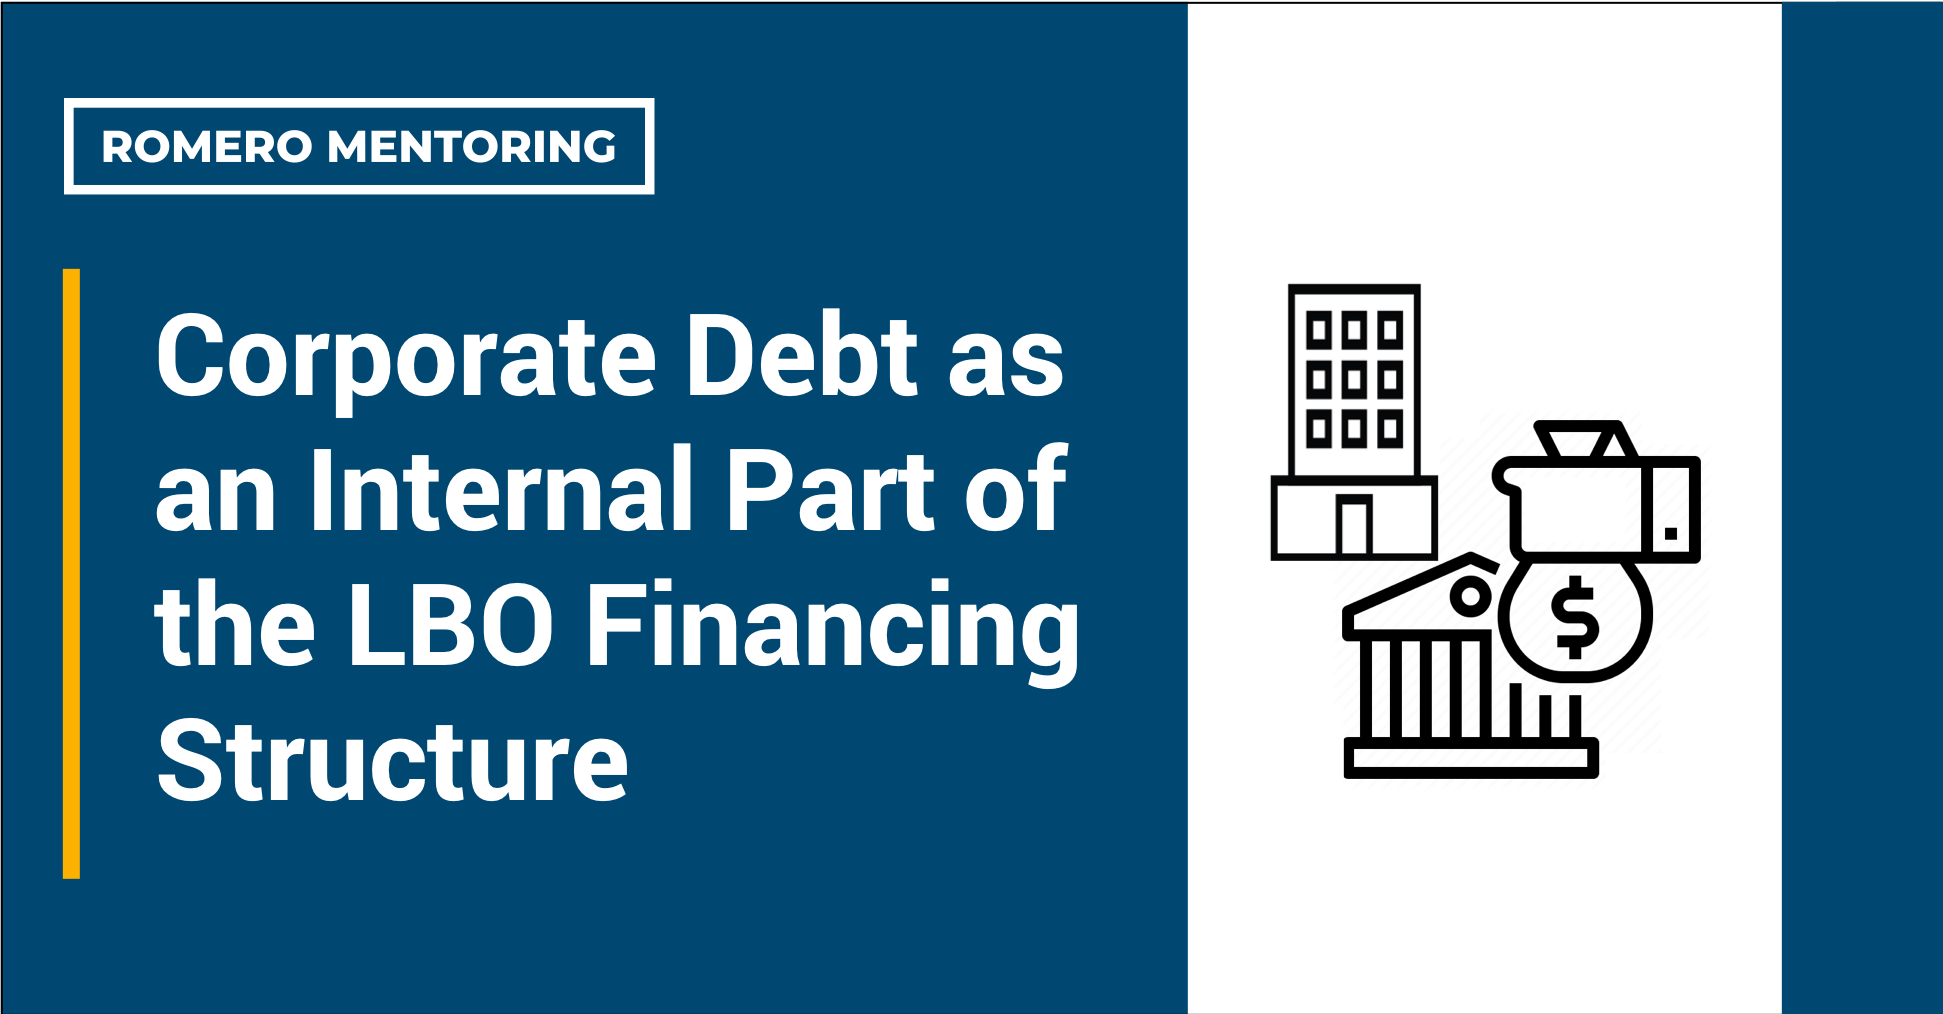 Corporate Debt as an Internal Part of the LBO Financing Structure